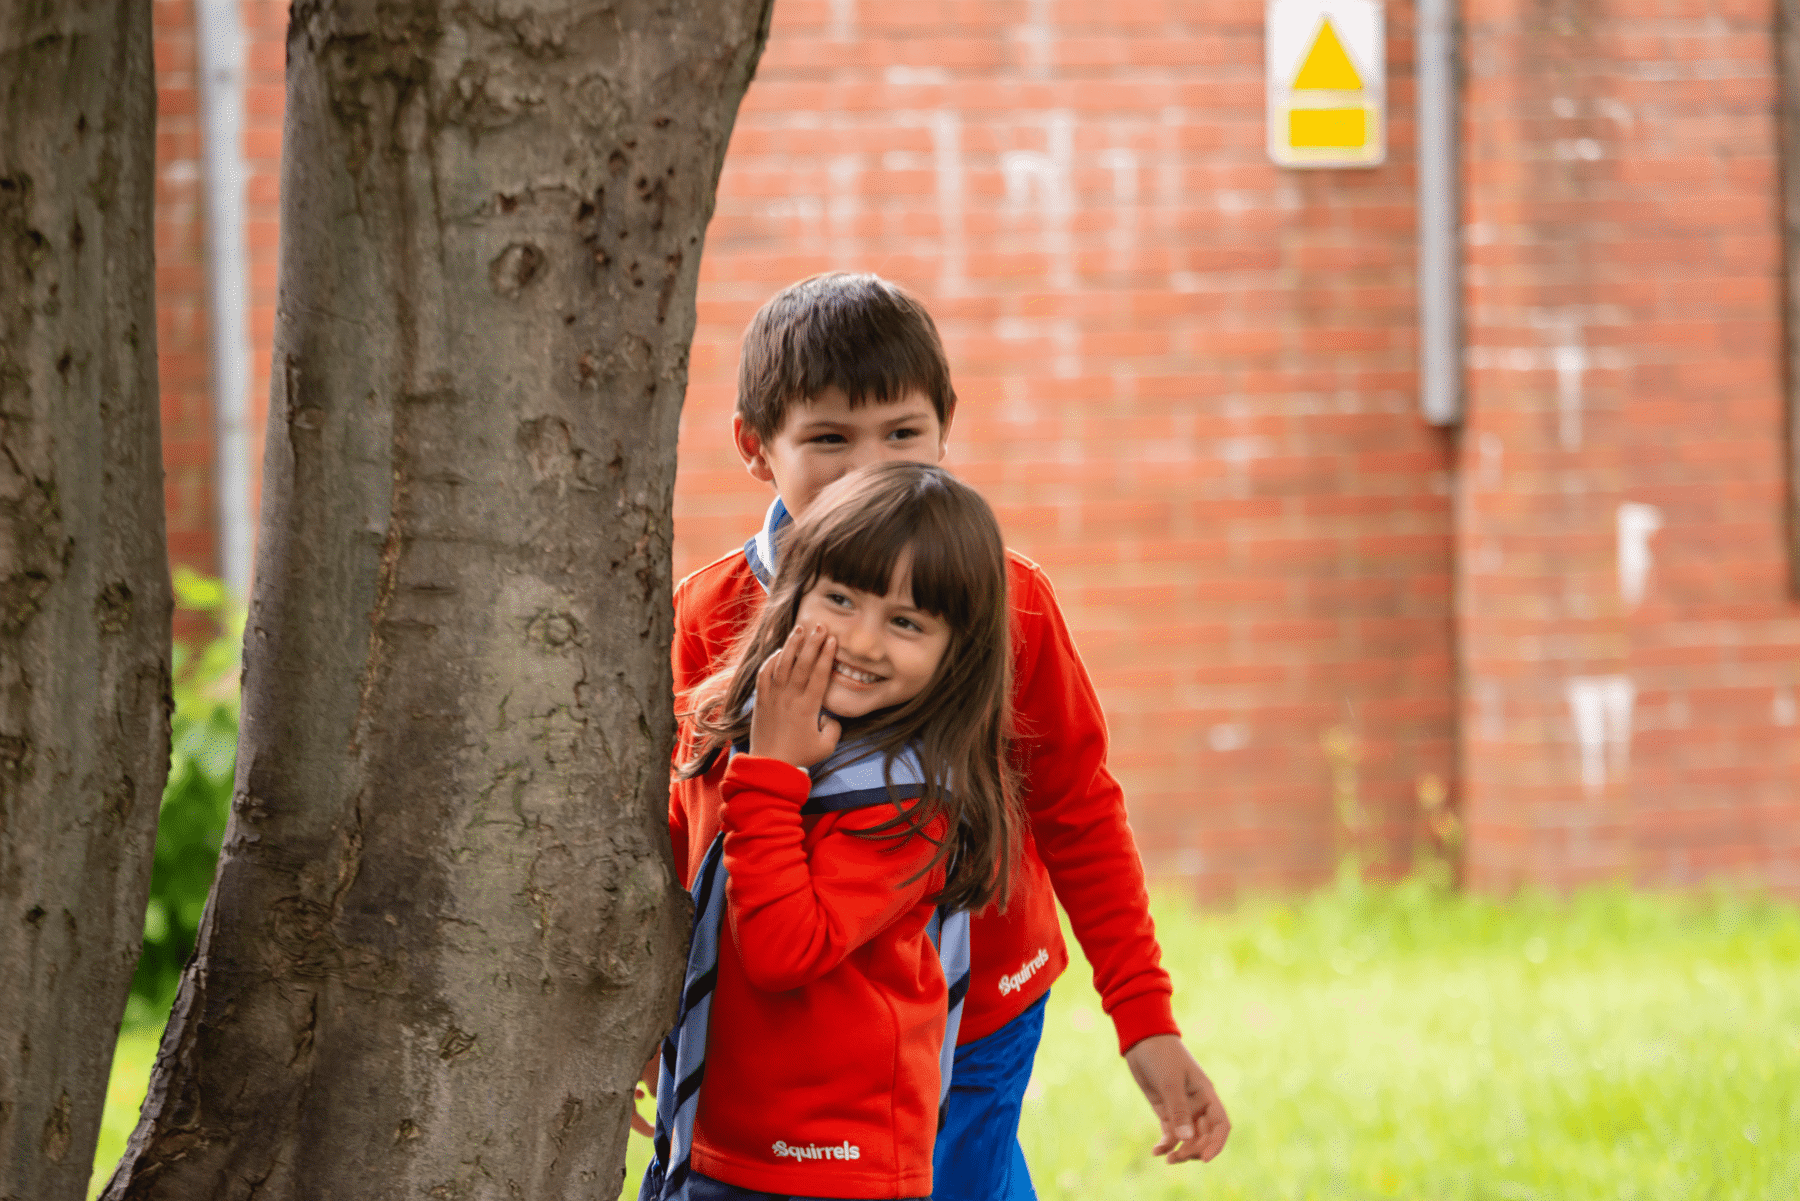 Two Squirrels, a boy and a girl, are hiding behind a tree and leaning out so that we can see their faces. They are playing a game and have big smiles on their faces. They are wearing red jumpers and the girl has her hand over part of her mouth.